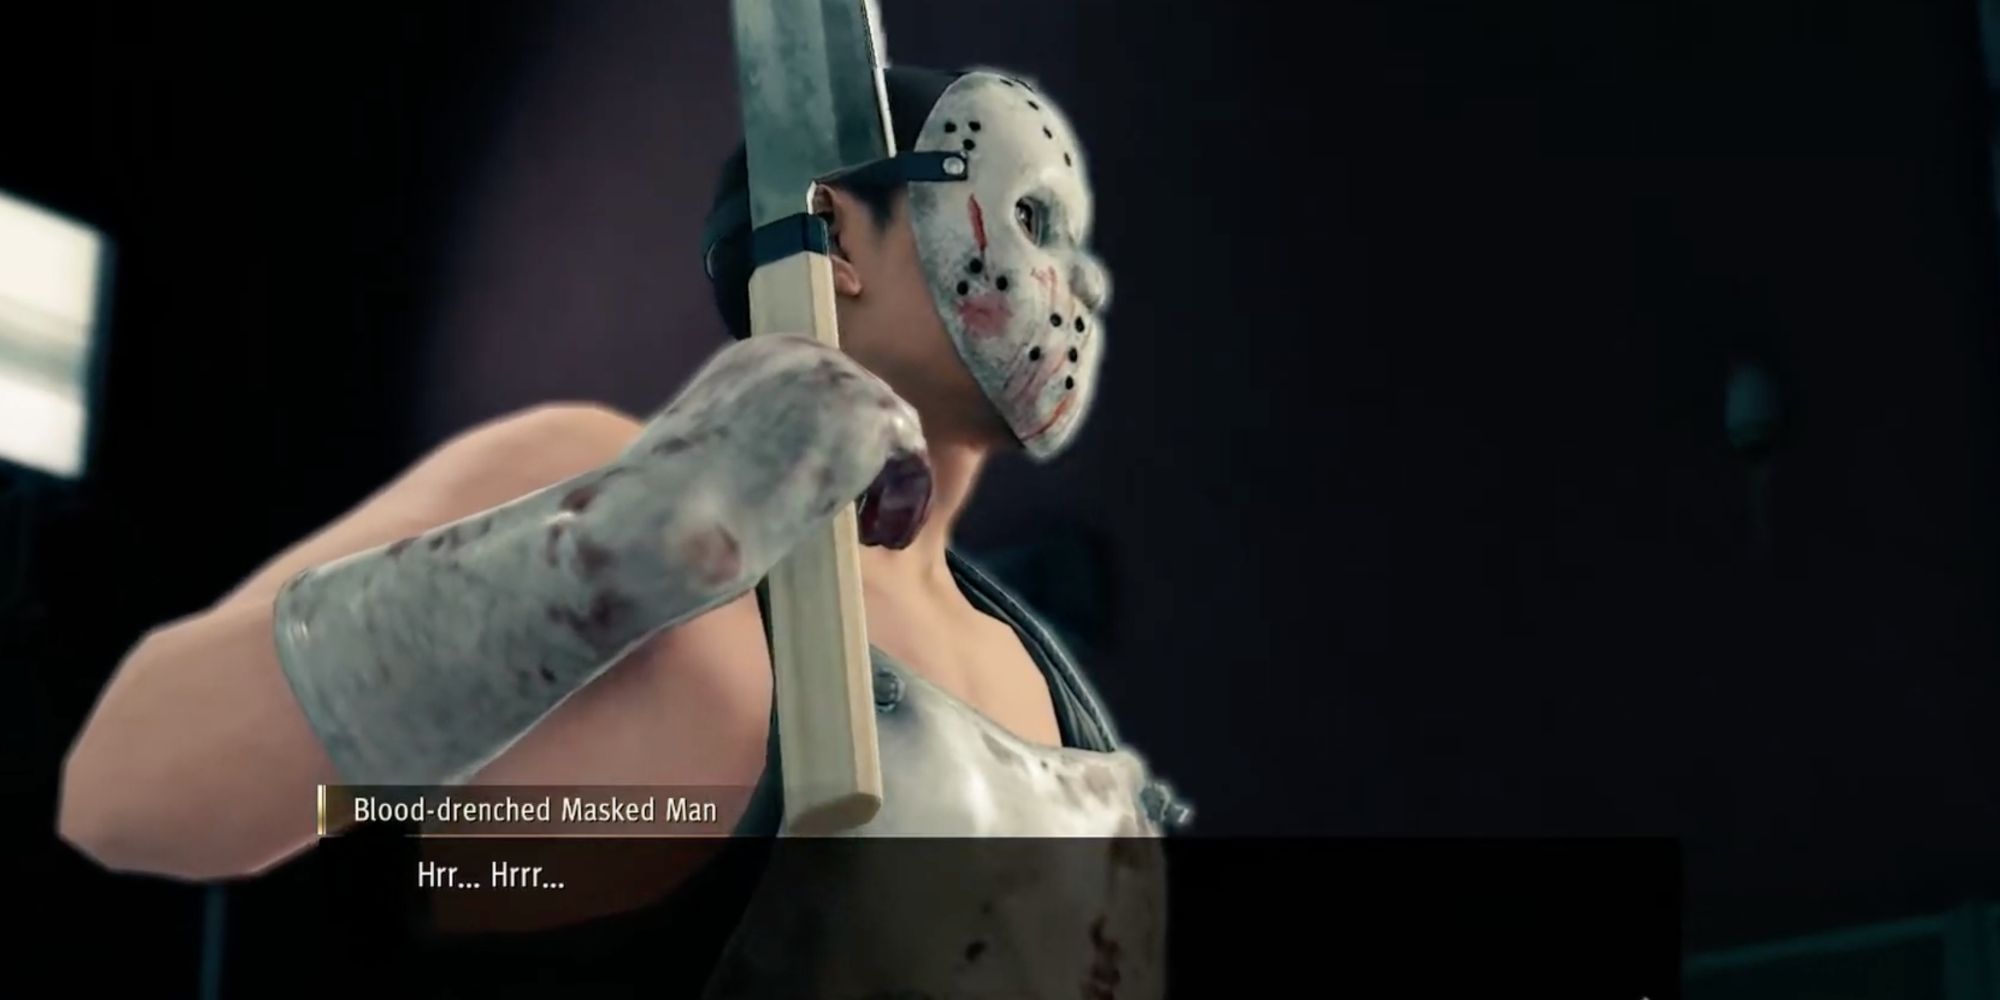 A screenshot from Yakuza: Like A Dragon, showing a blood-drenched masked man grunting while holding a large knife